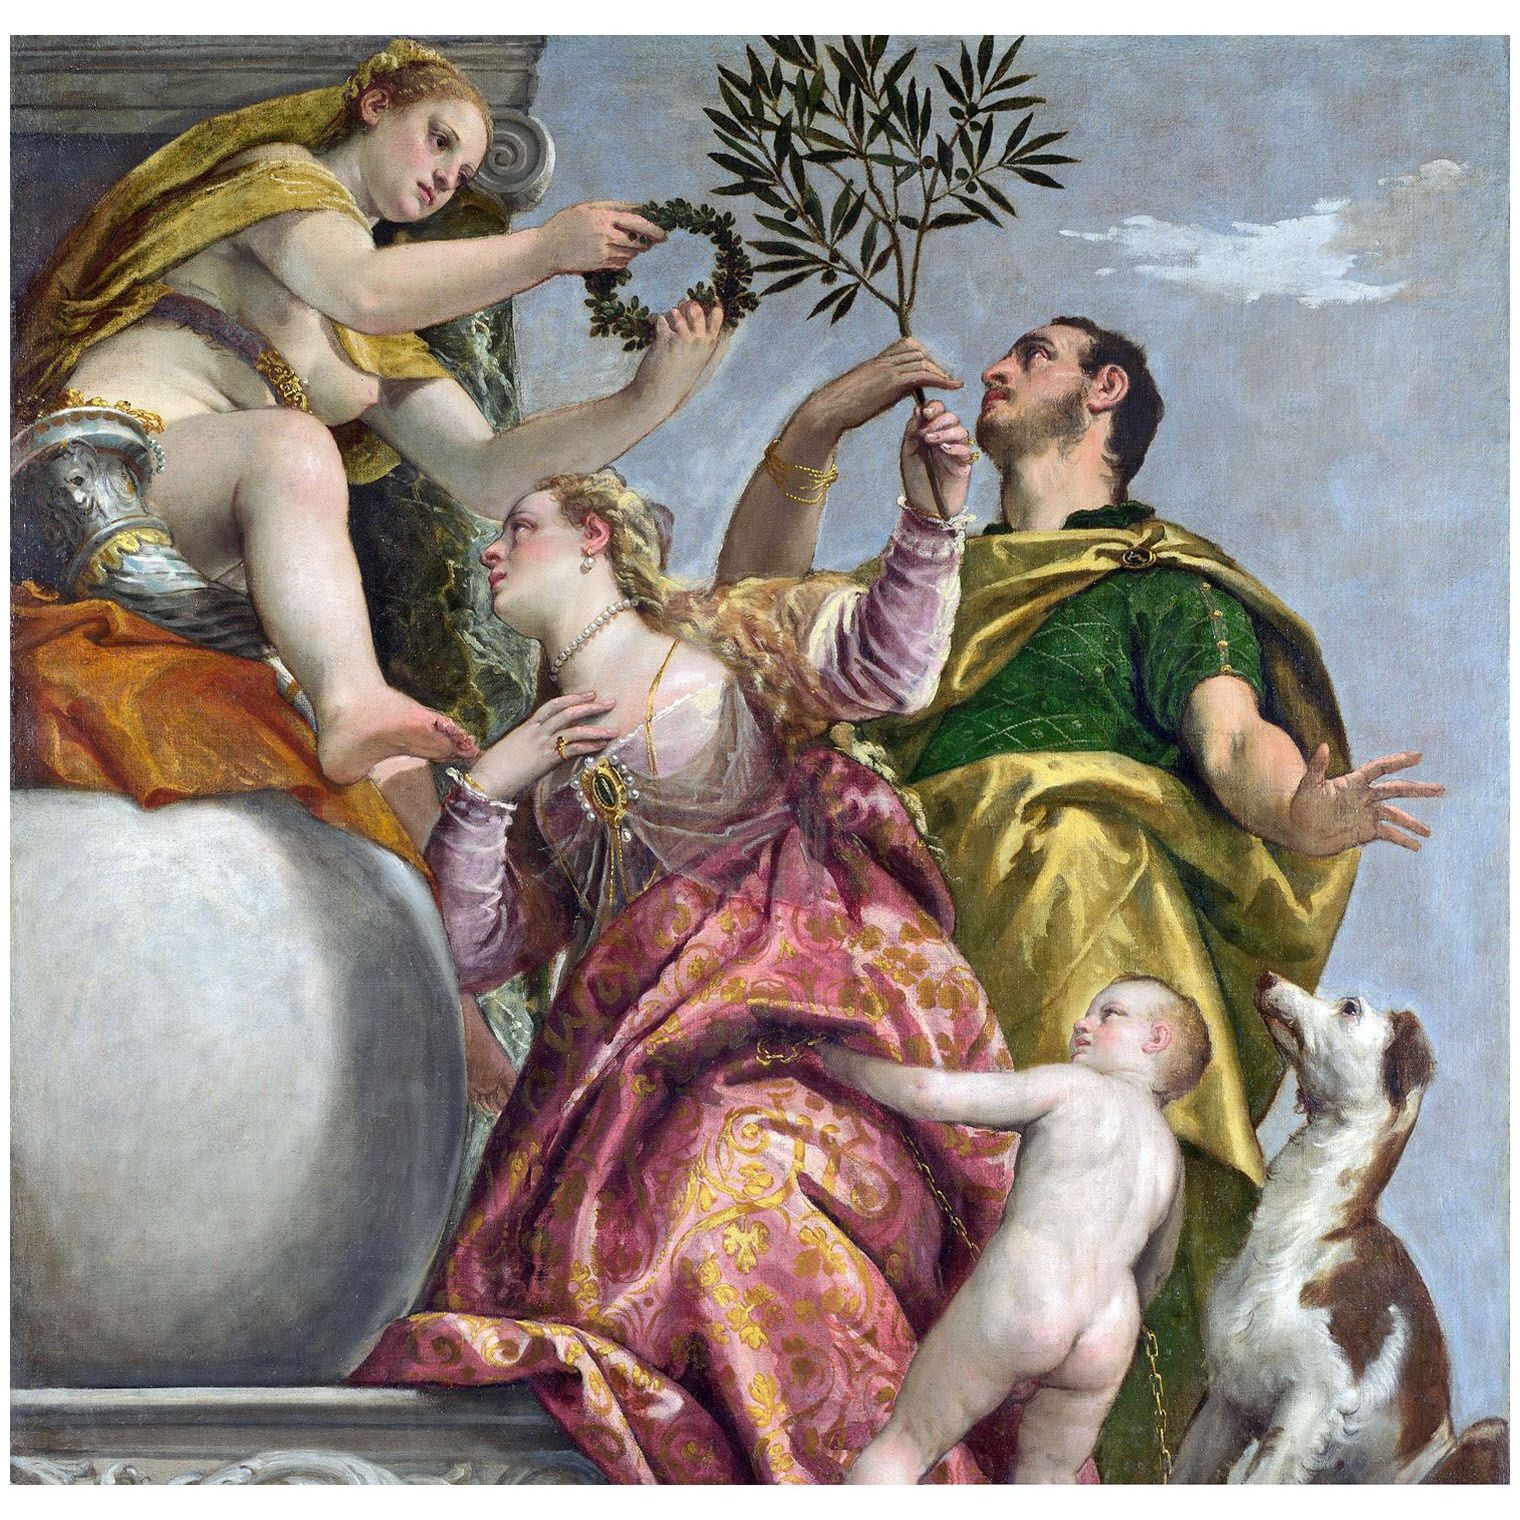 Paolo Veronese. Allegoria dell'amore IV. 1575. National Gallery London